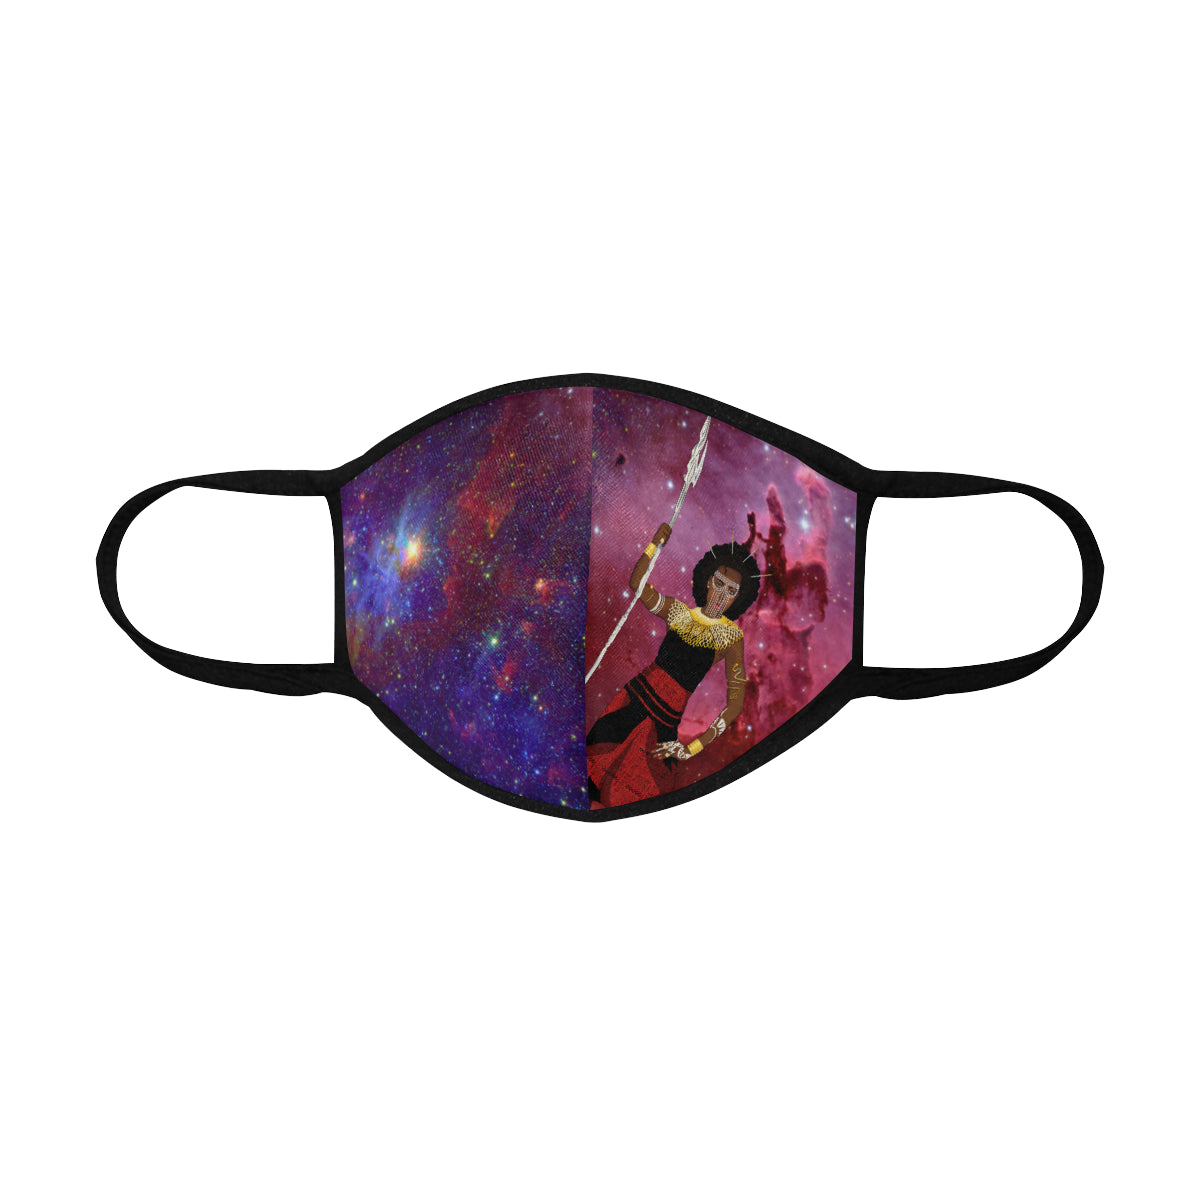 AfriBix Warrior Queen of the Galaxy Cotton Fabric Face Mask with filter slot (30 Filters Included) - Non-medical use